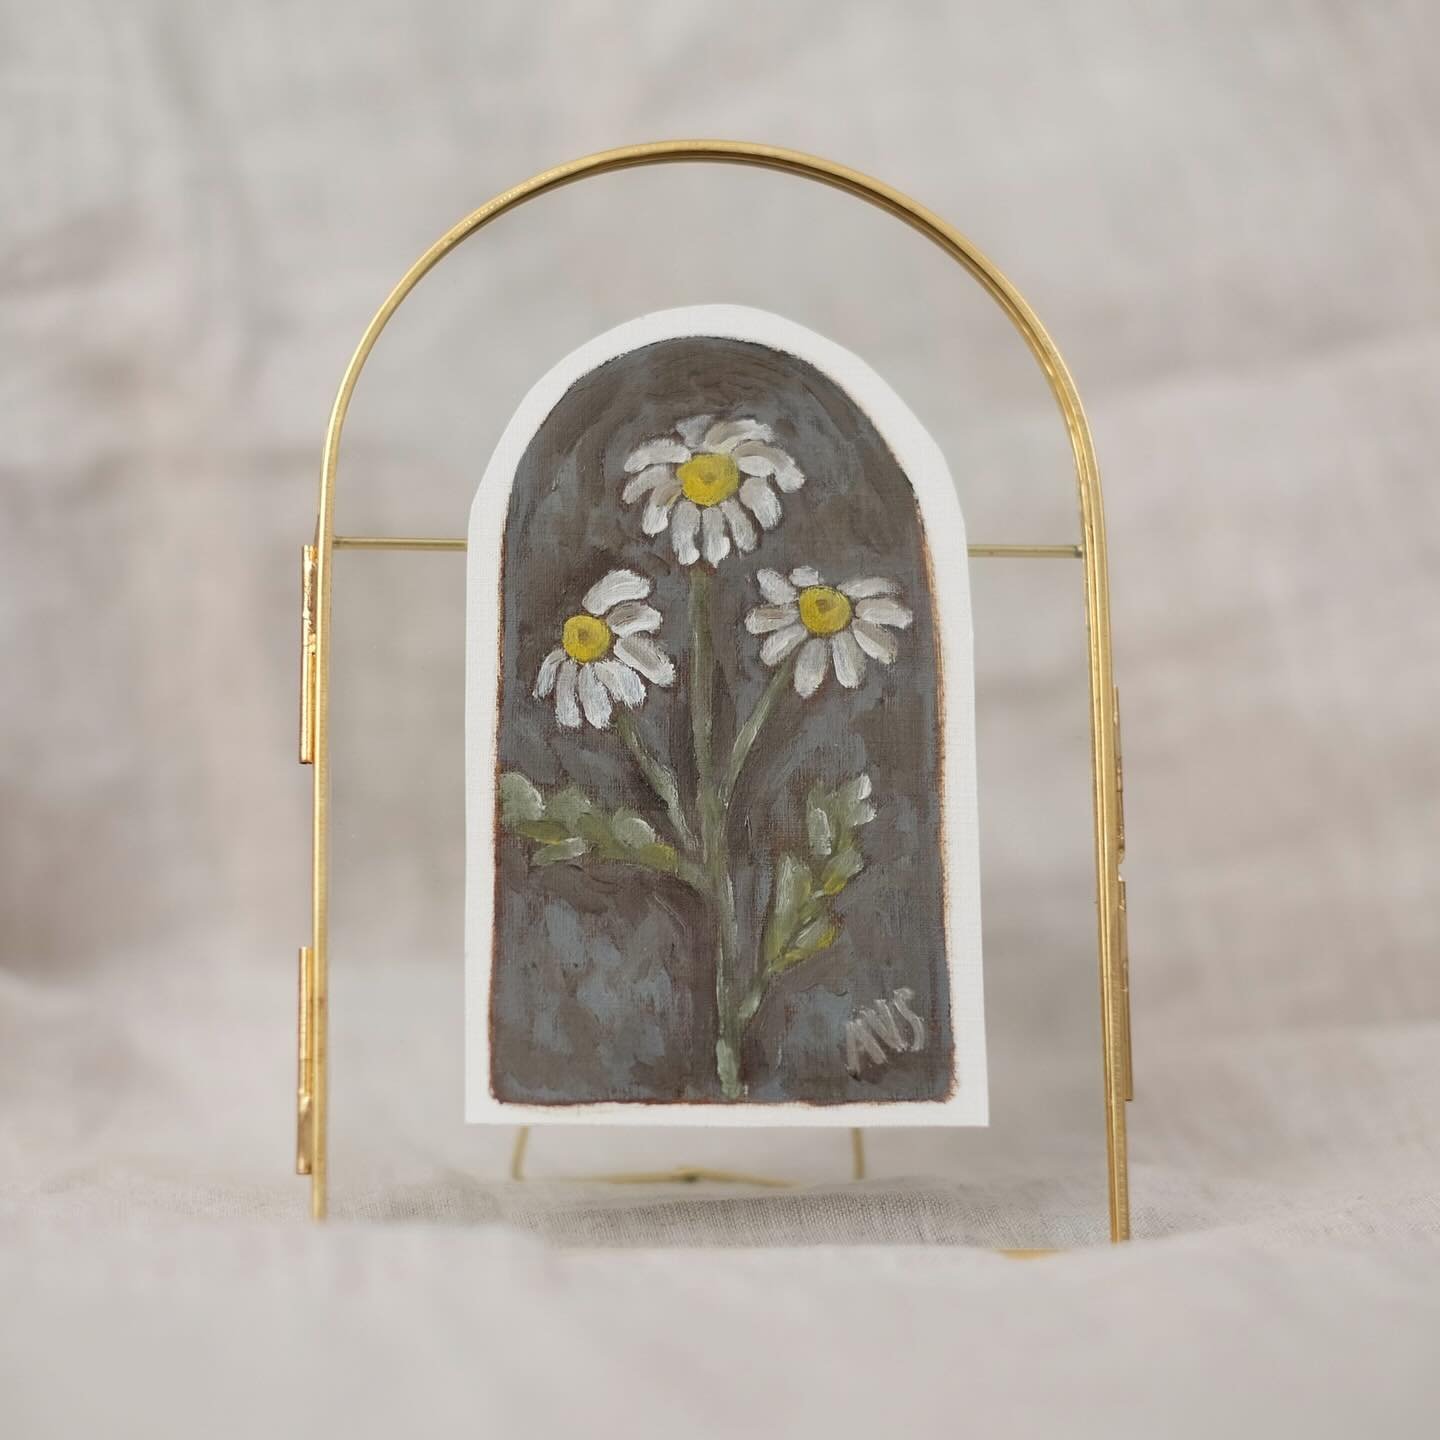 Cutie number one of the chamomile collection. This piece is sold, but there are a handful left in the shop in a variety of colors and sizes.

These delicate pieces are perfect for primary bedrooms, add an inviting flair to mantles and bookcases, or w